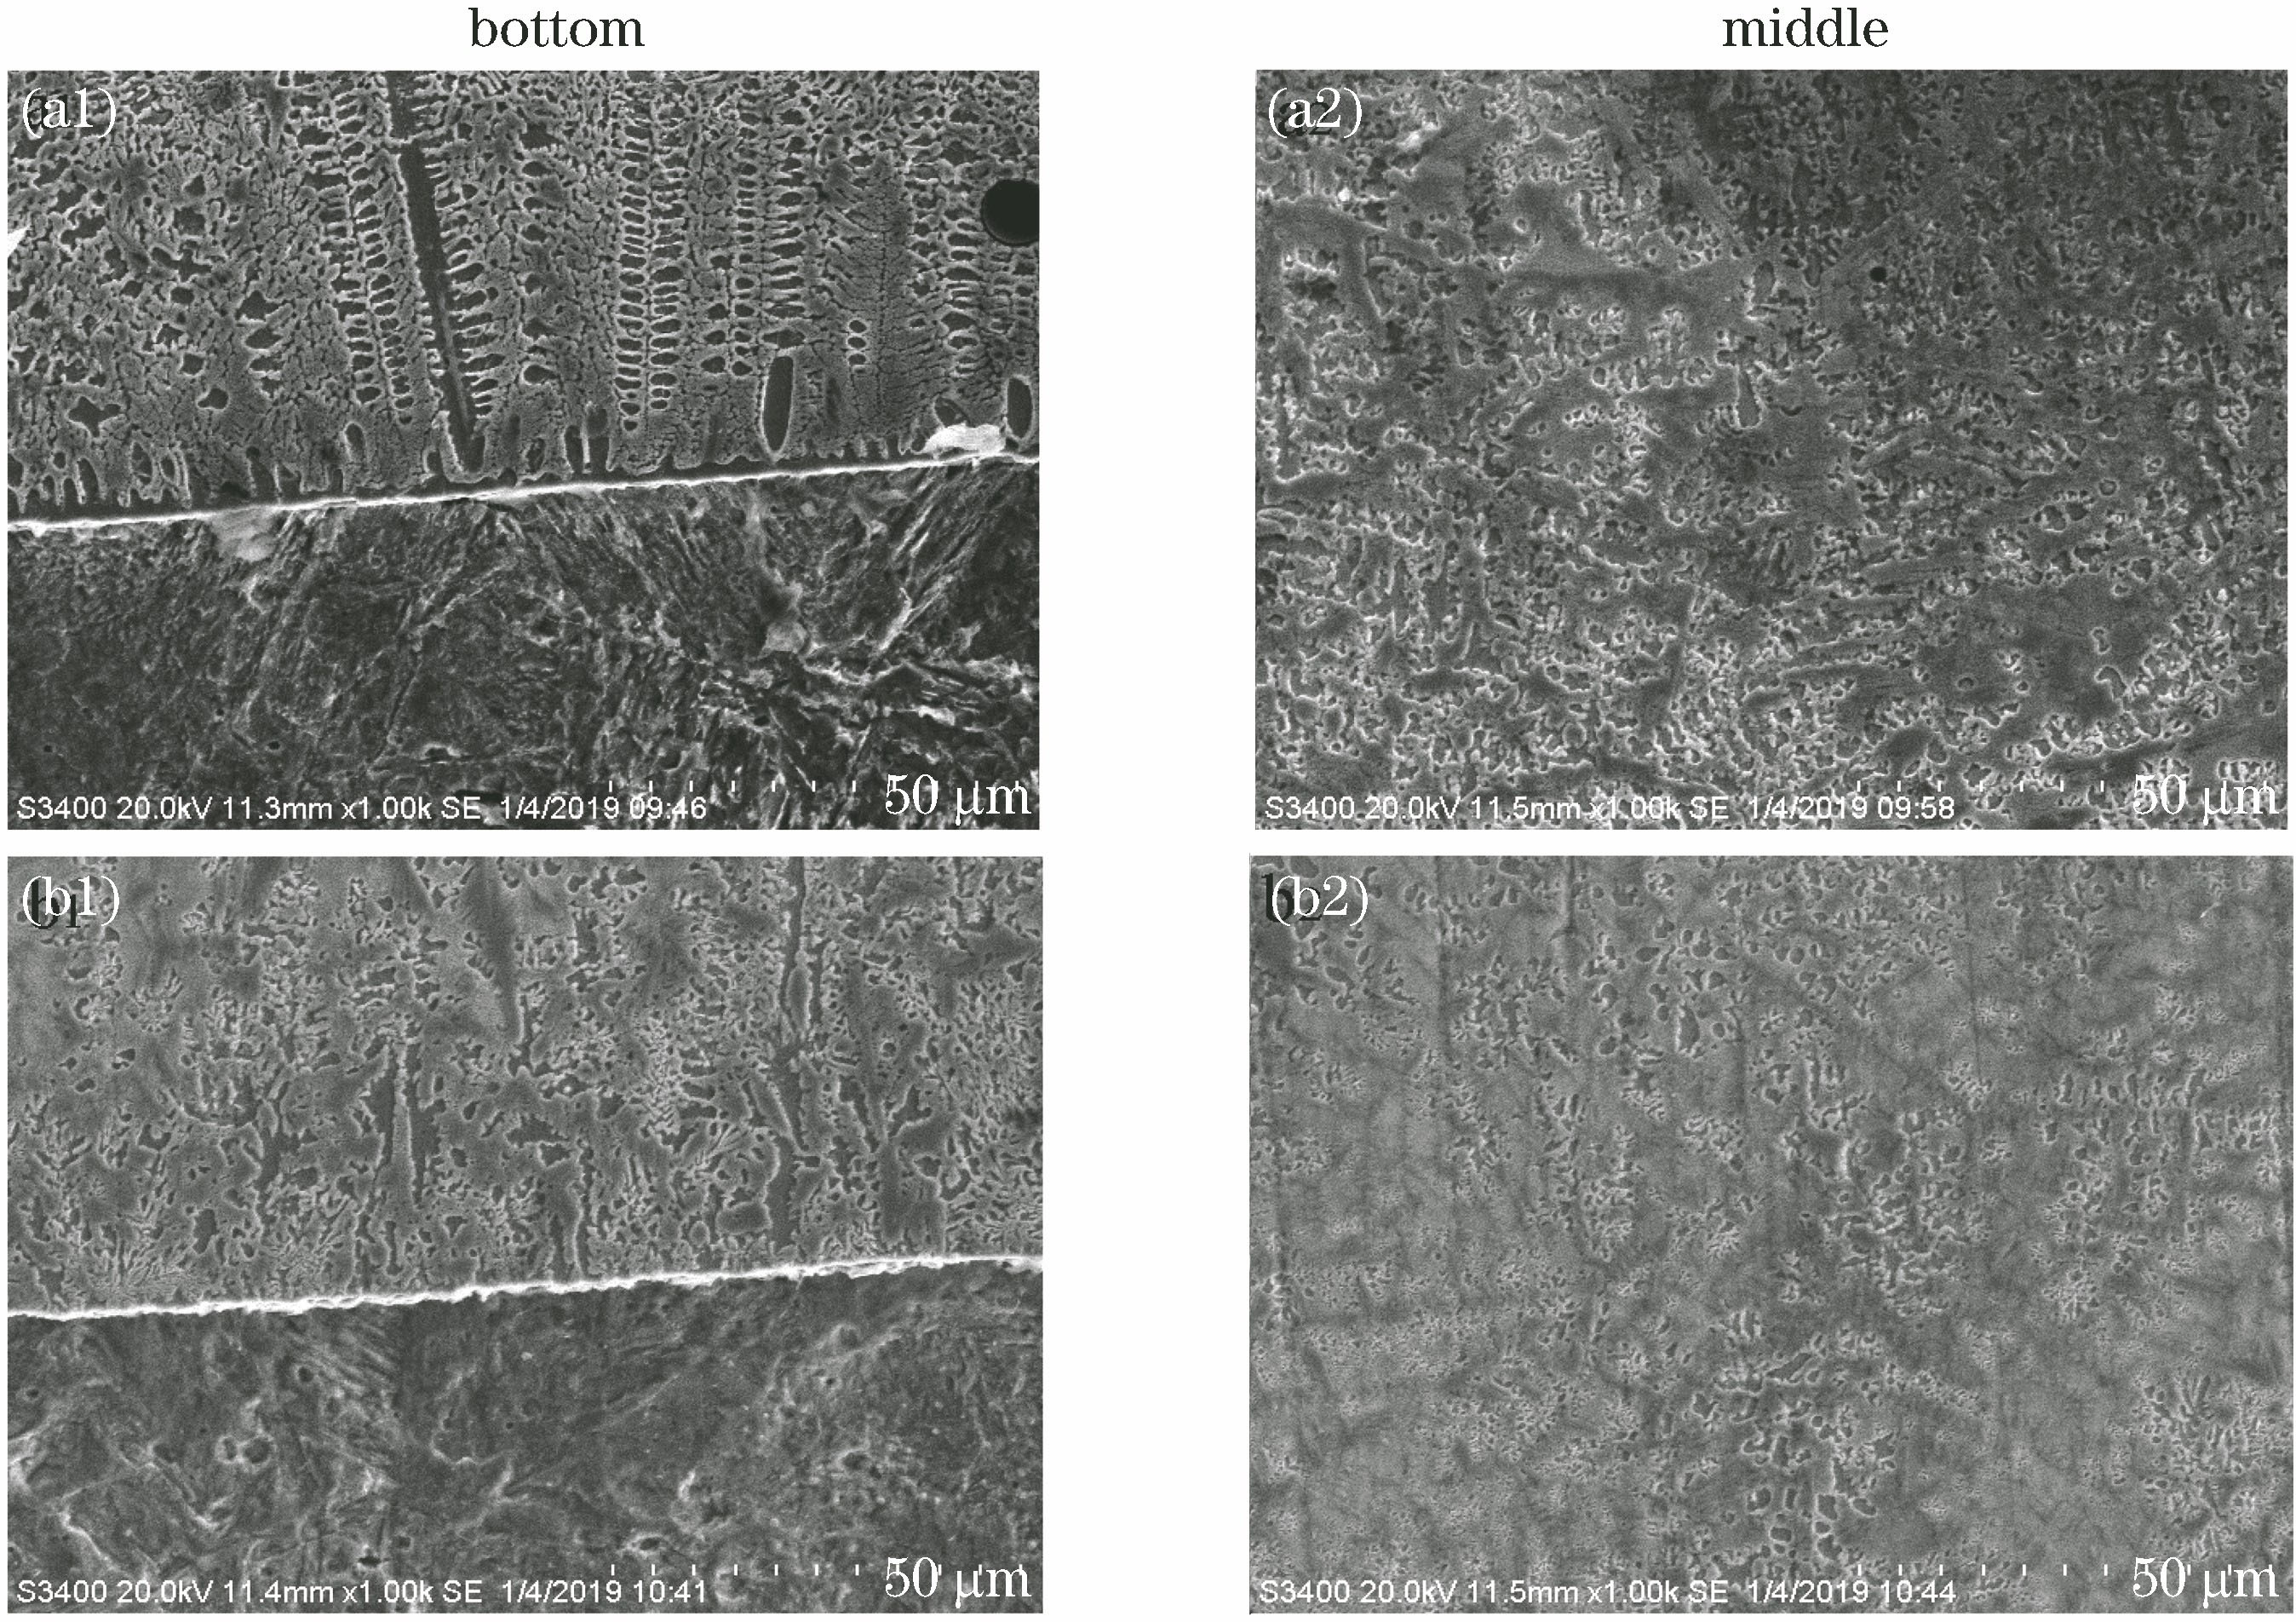 Microstructures of coatings under different process conditions. (a1)(a2) non-vacuum environment; (b1)(b2) vacuum environment